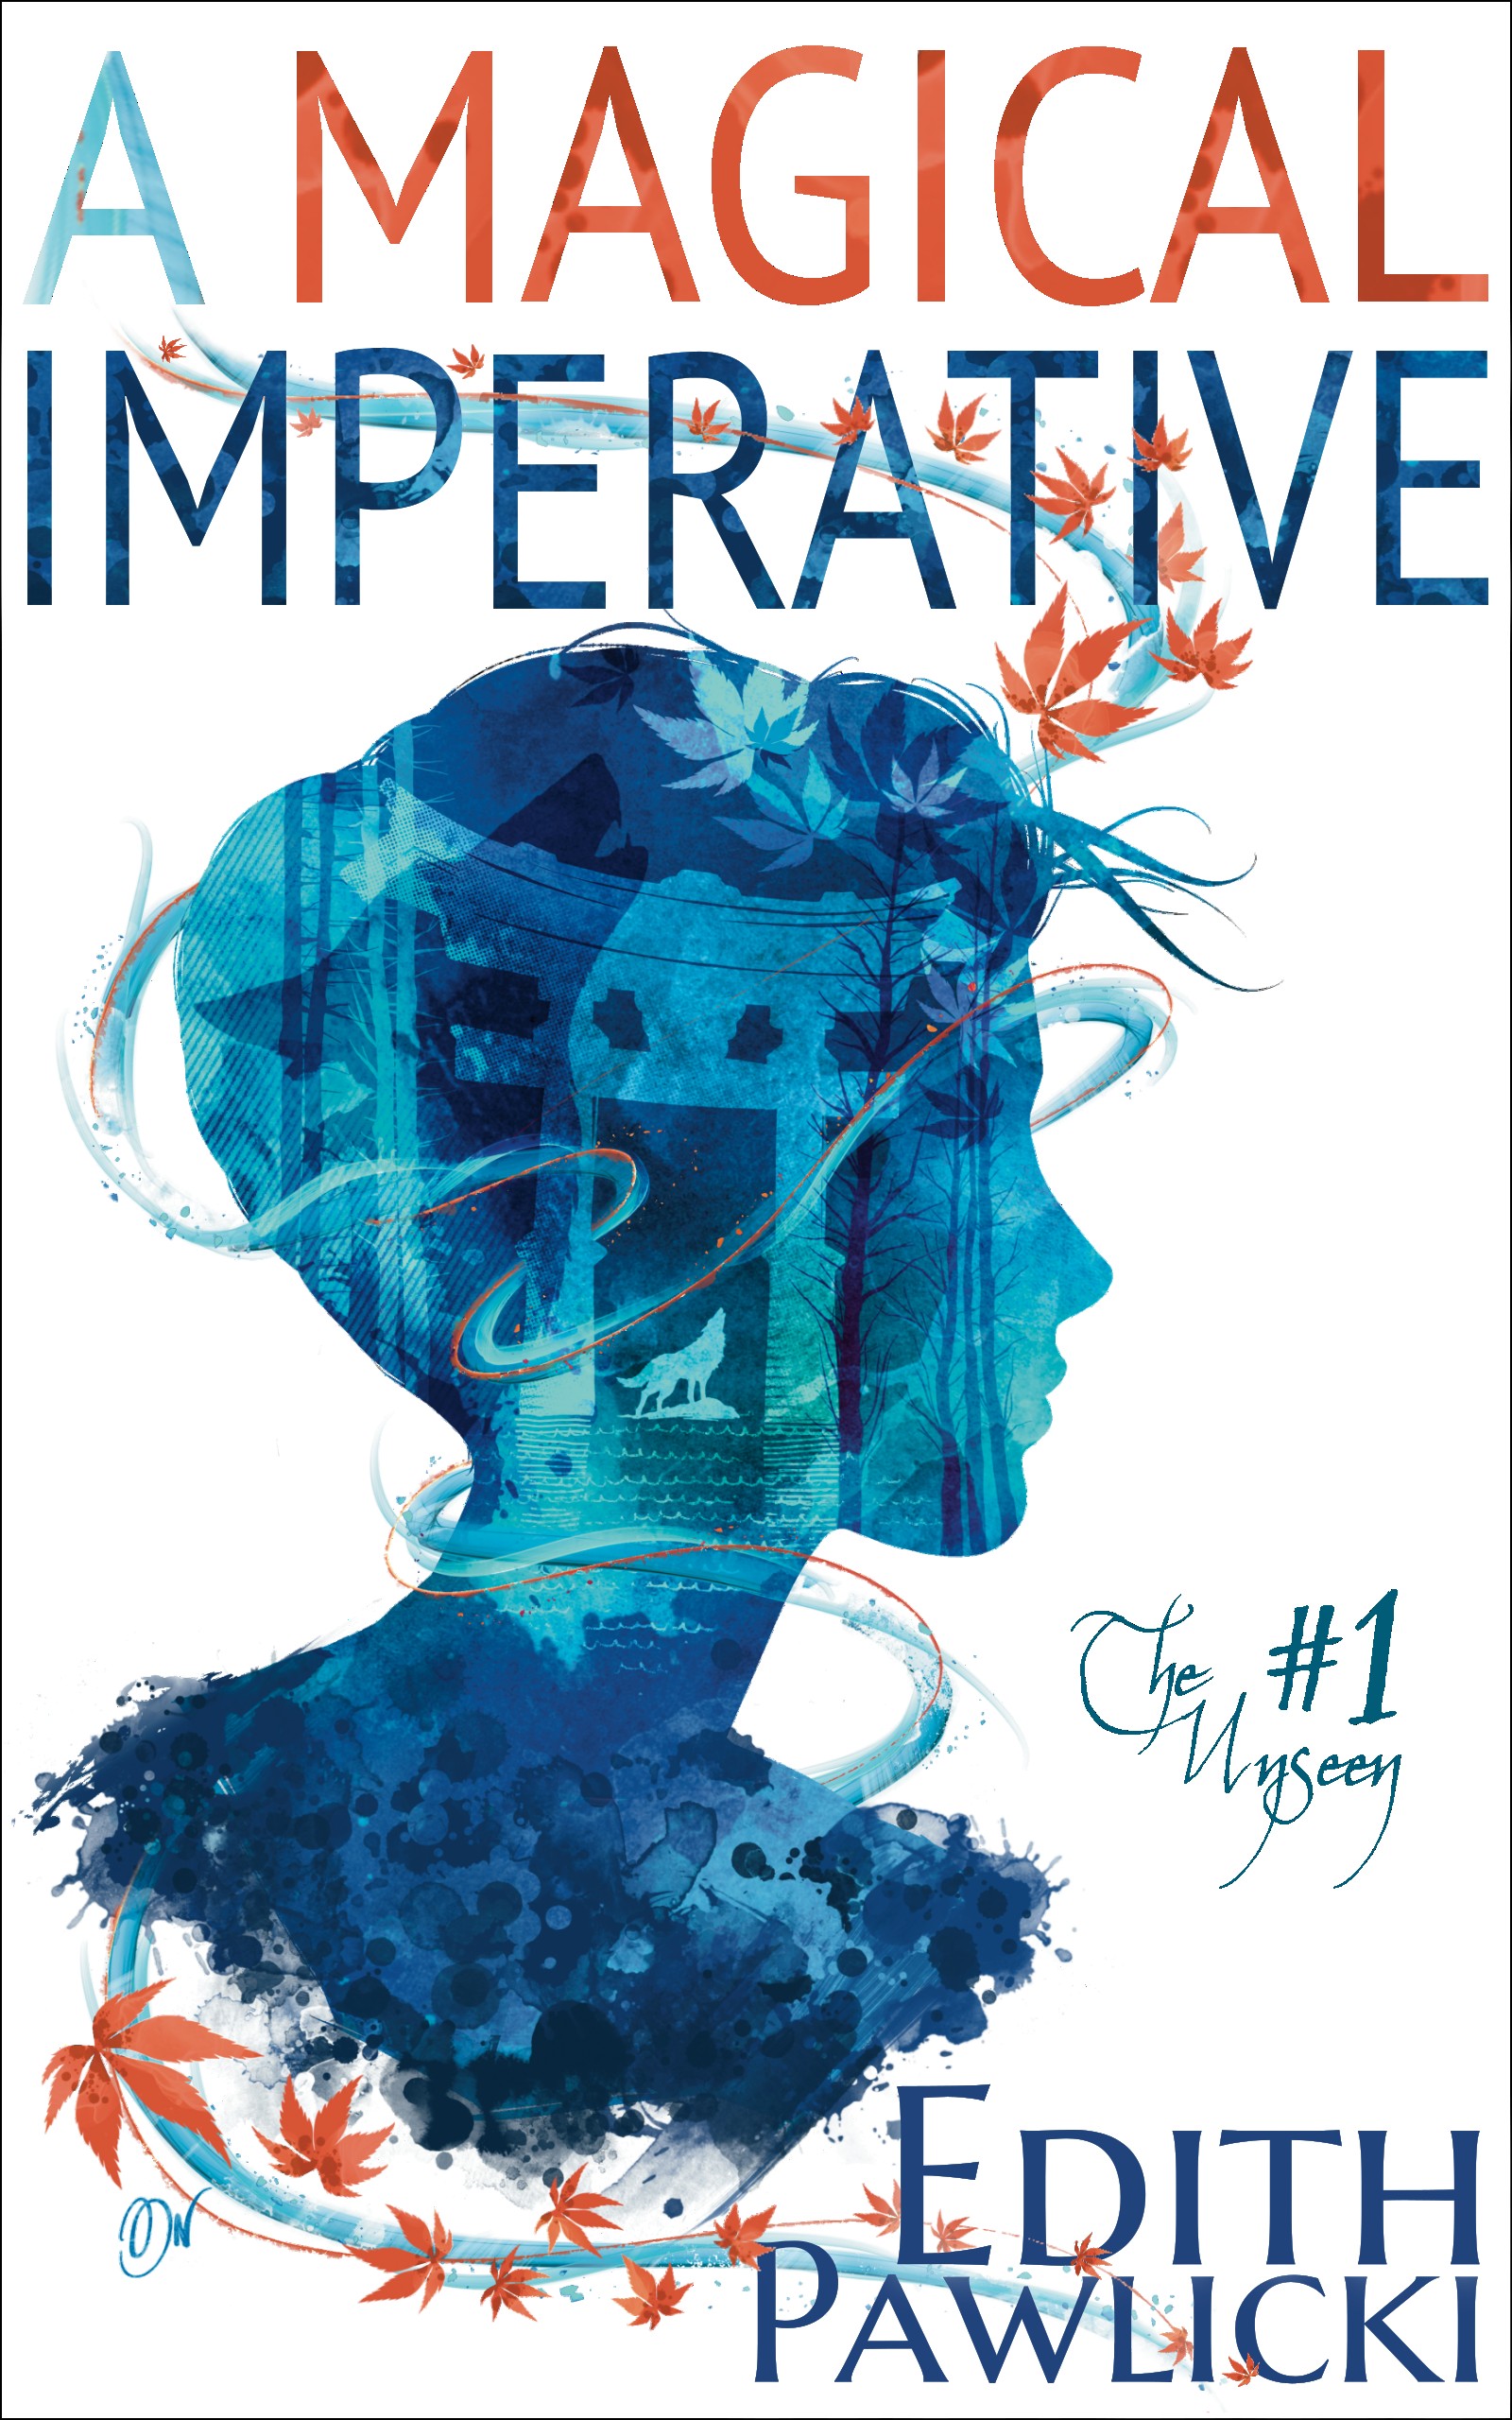 Cover of A Magical Imperative. Blue silhuoette of a woman with a tori gate, trees, and wolves inside with a swirling vermillion maples leaves around her.